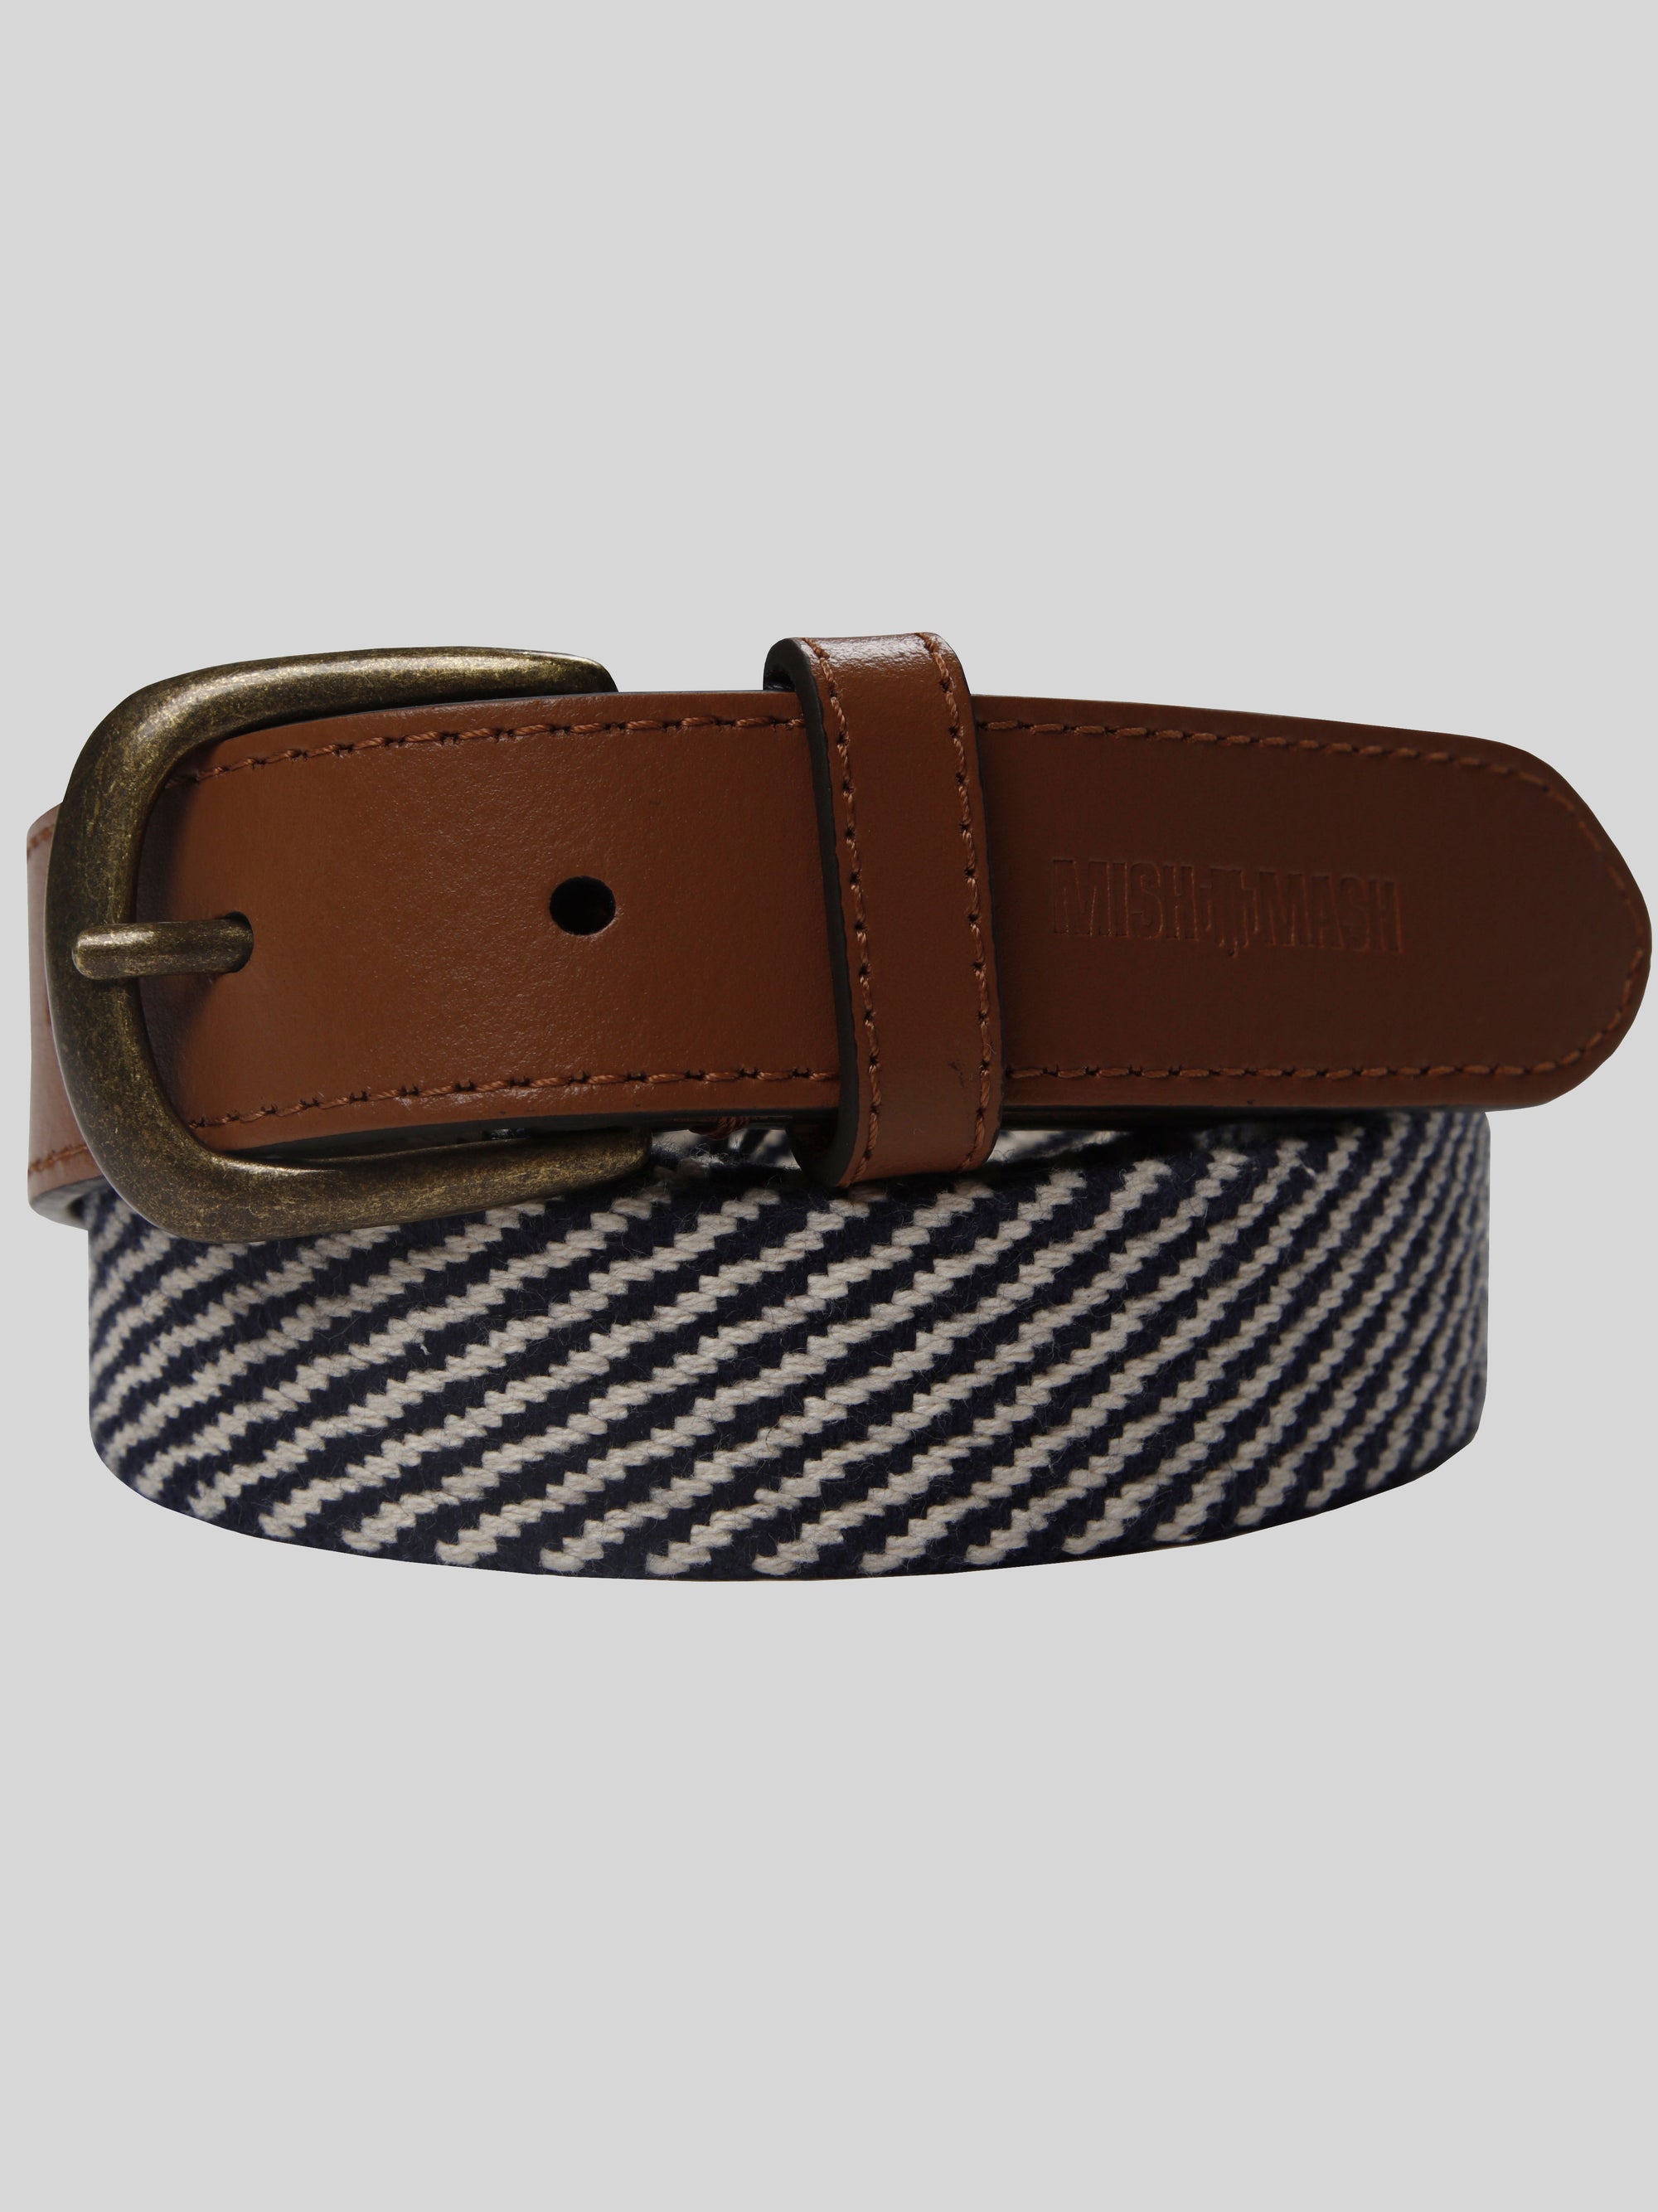 Woven twill navy and white jean belt mish mash jeans